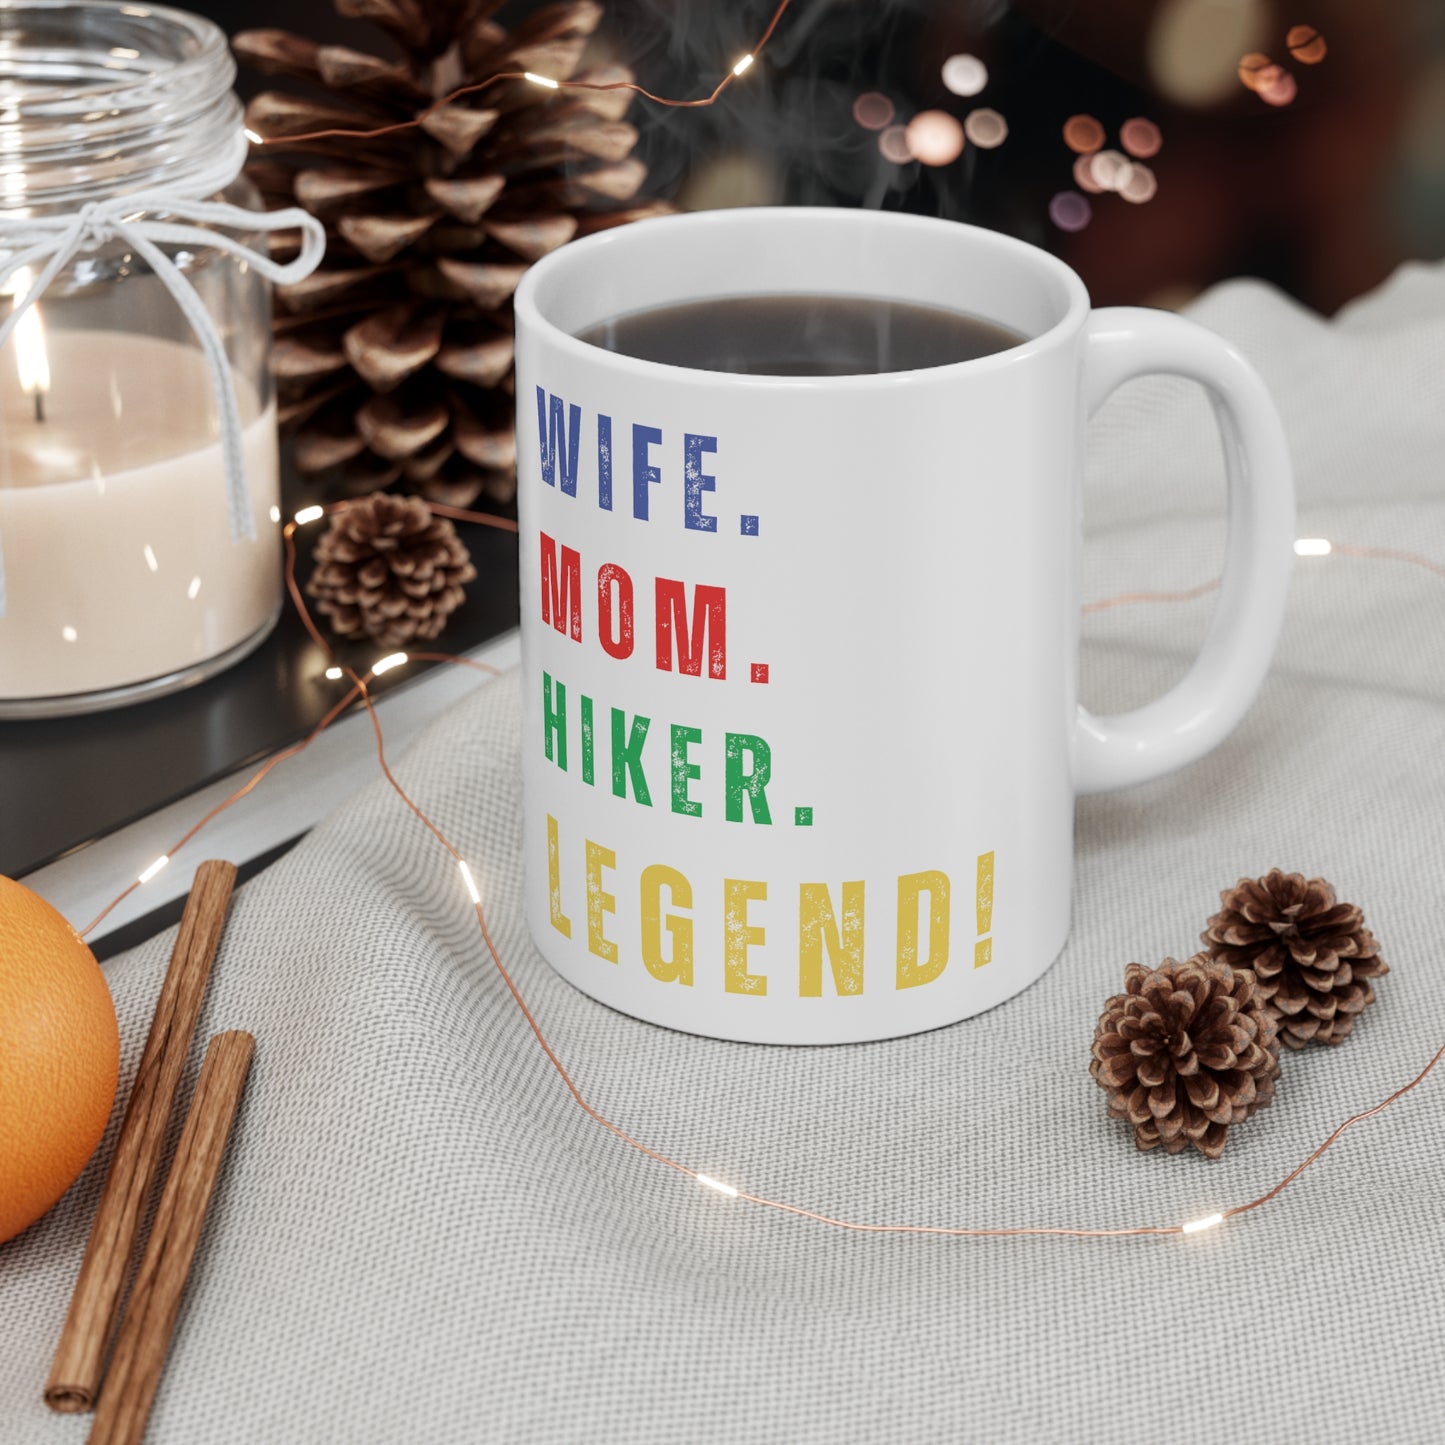 WIFE. MOM. HIKER. LEGEND - Ceramic Mug 11oz - NOT SOLD IN STORES - Birthday, Valentine's Day, Mother's Day - ANY DAY!